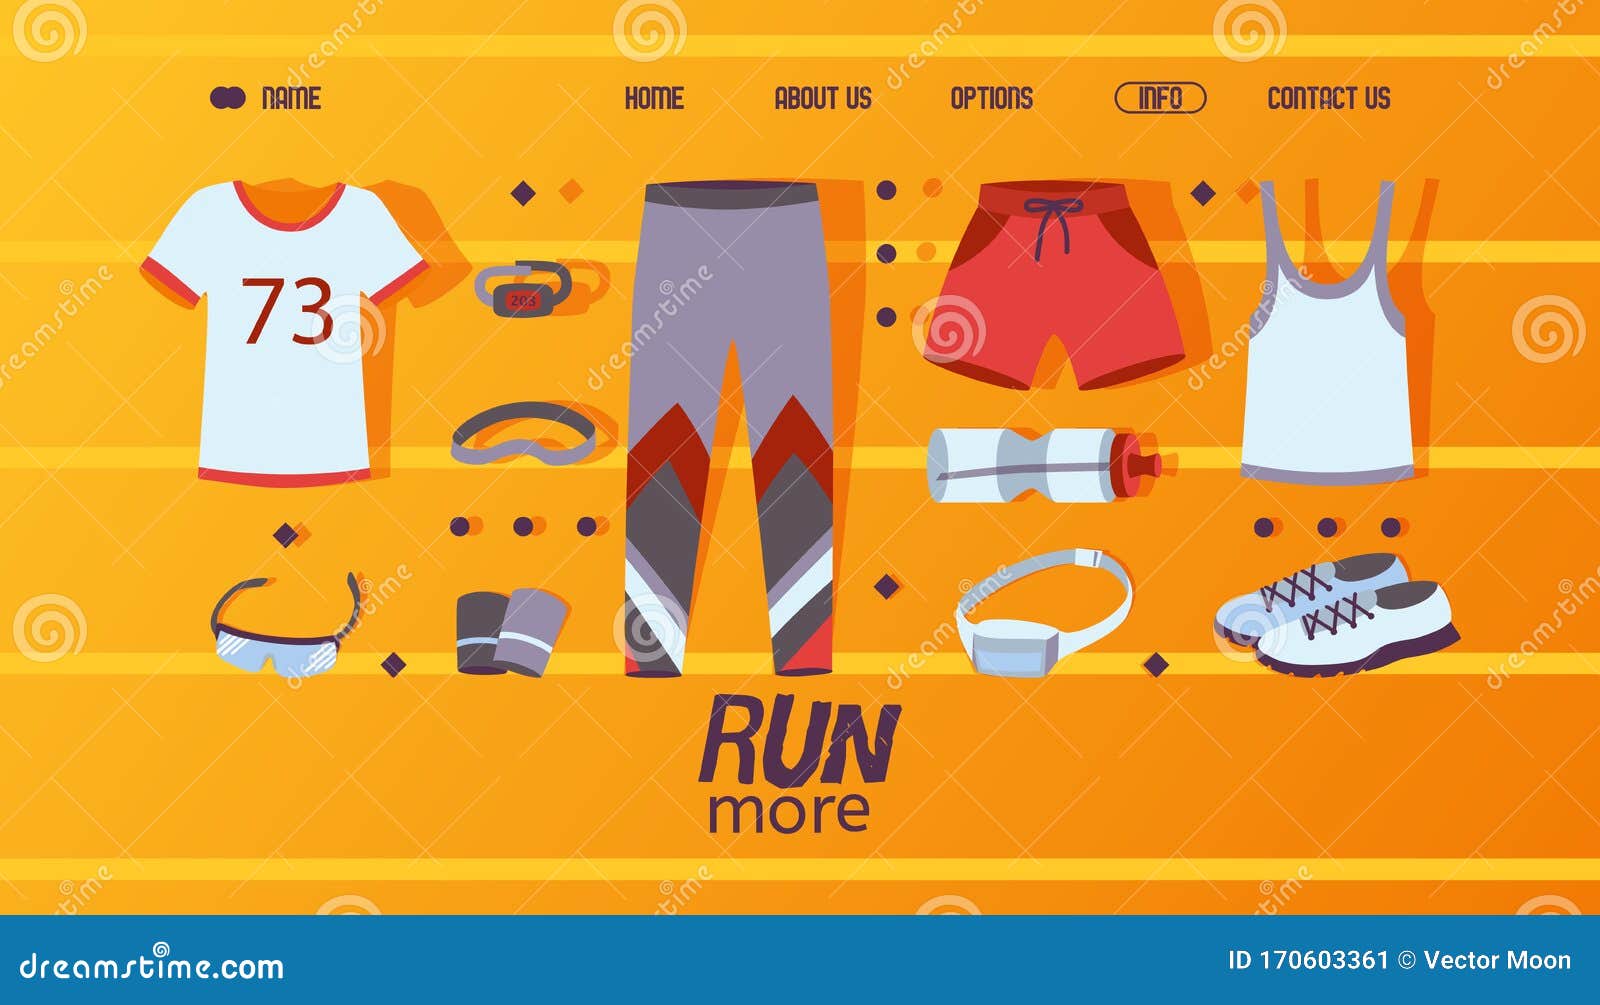 https://thumbs.dreamstime.com/z/fitness-clothes-shop-website-design-vector-illustration-landing-page-template-outfit-accessories-sport-runners-online-170603361.jpg